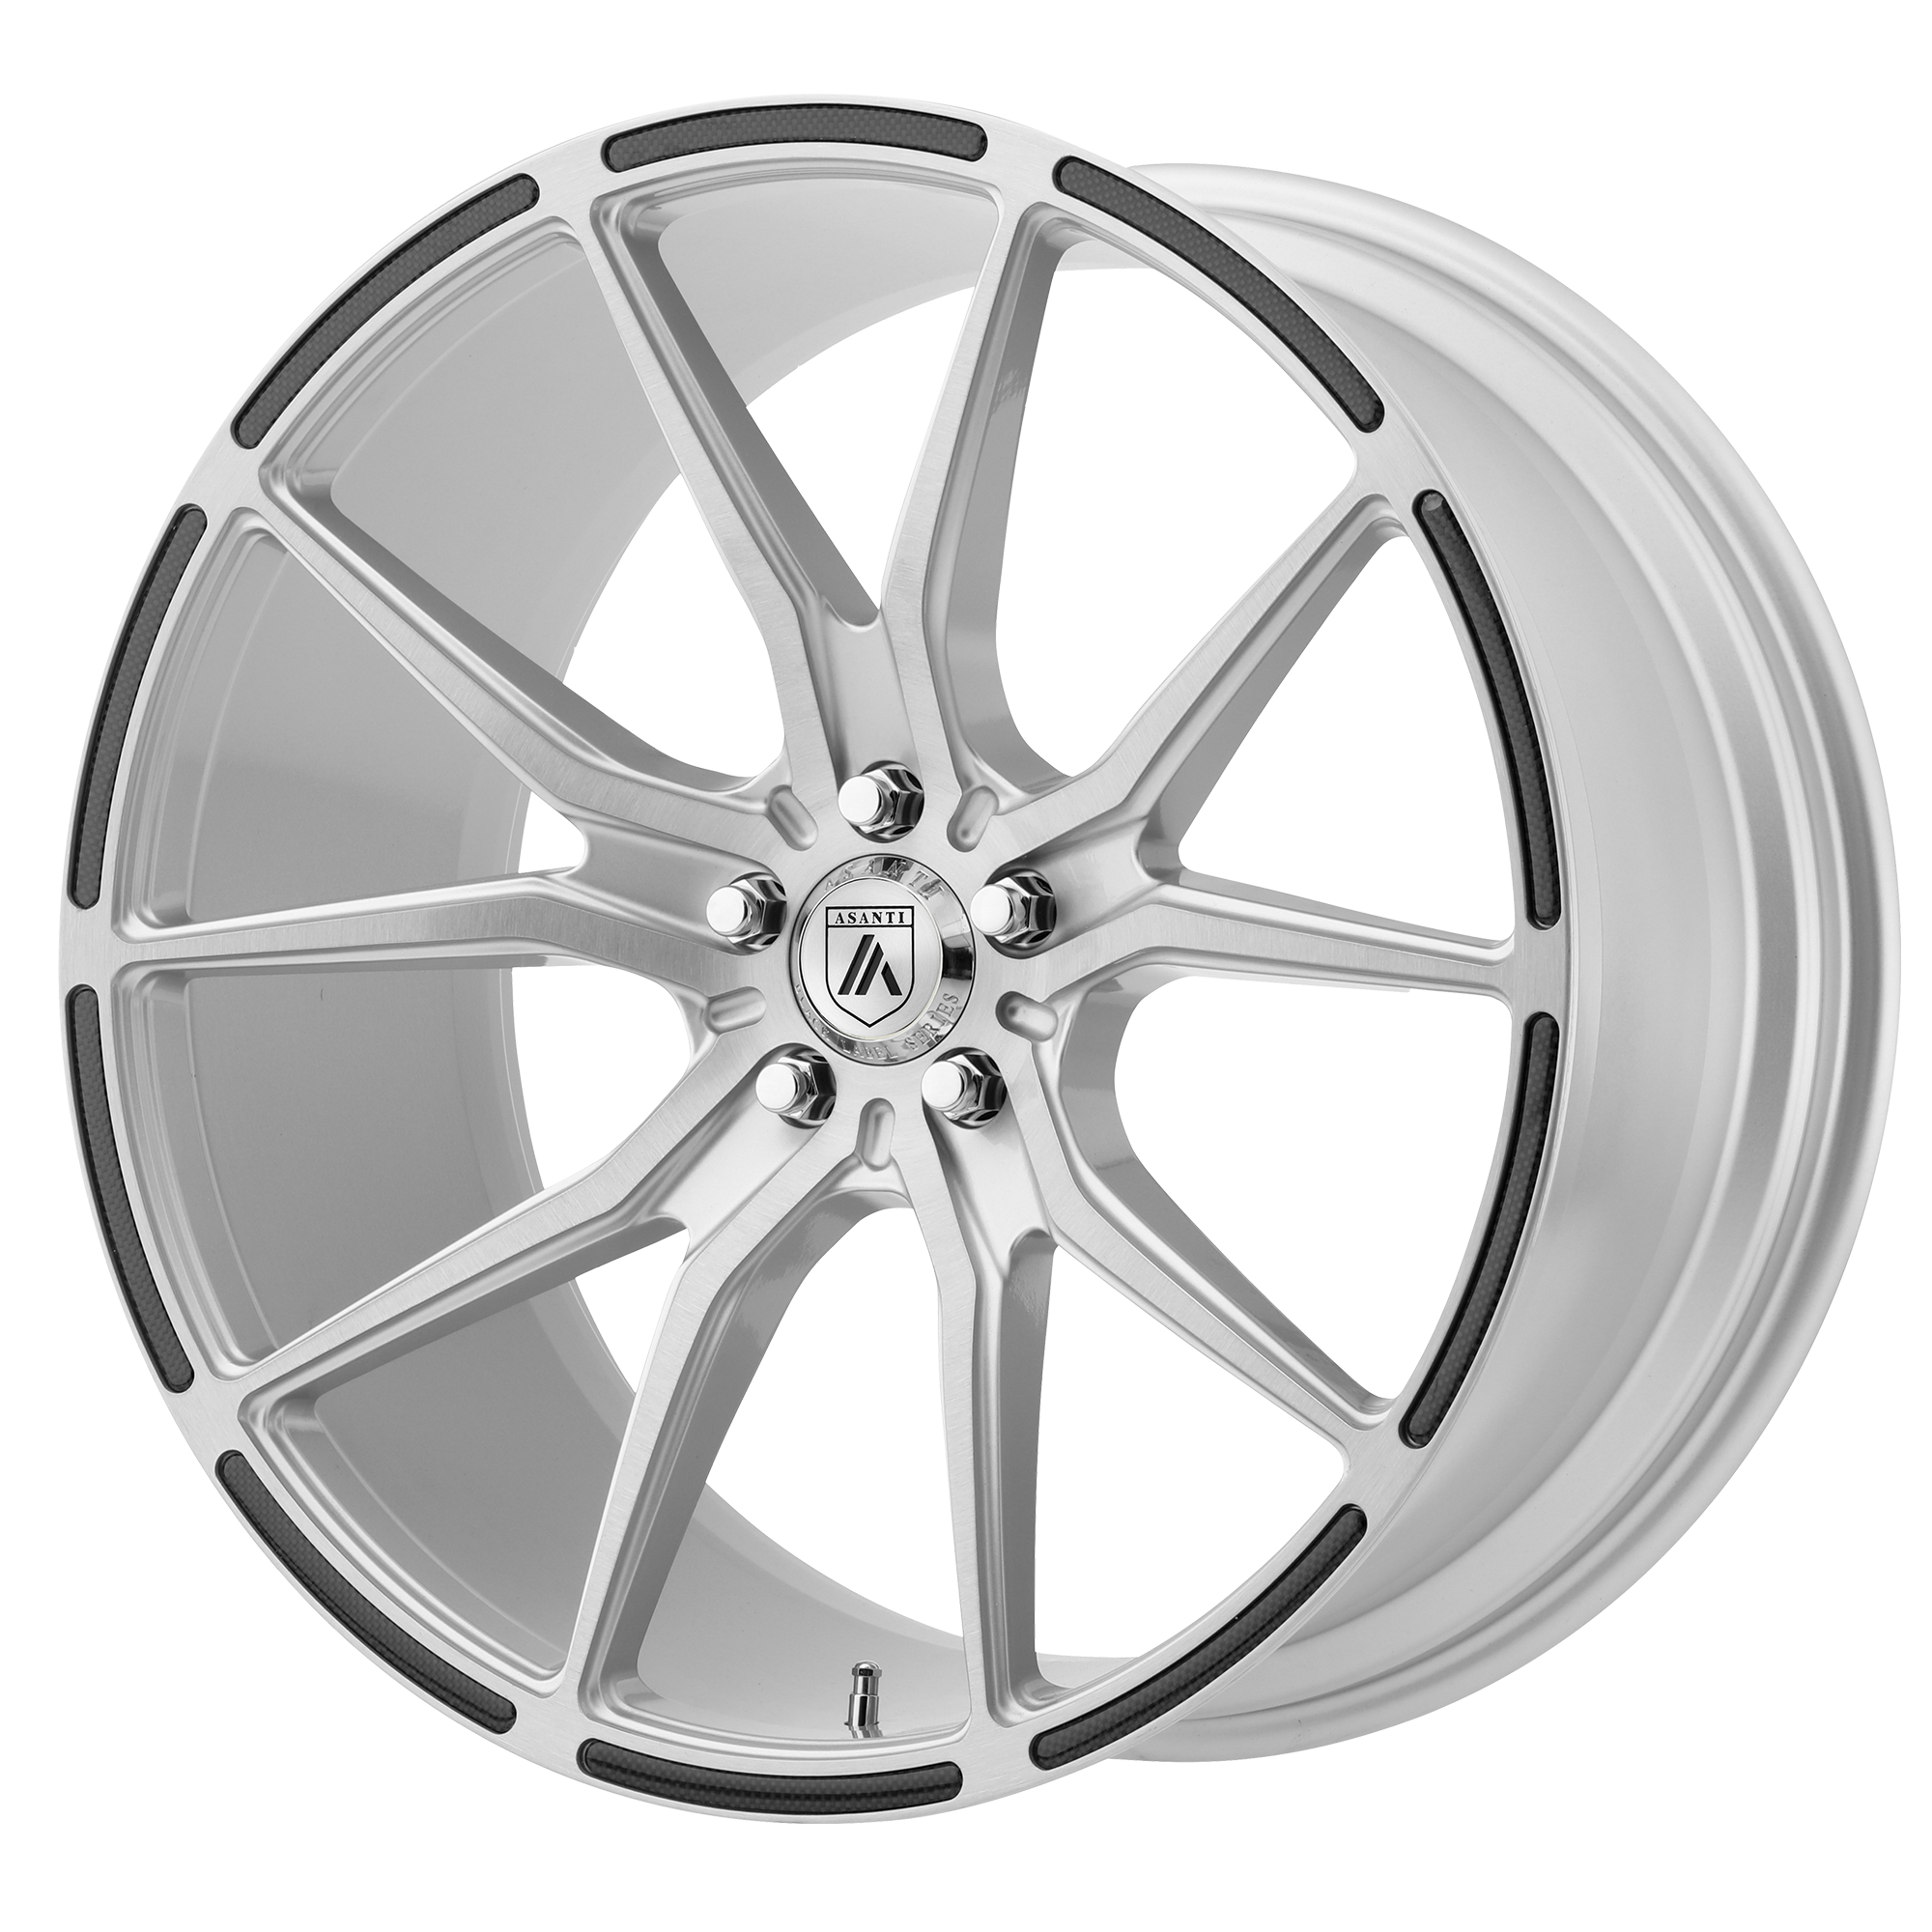 VEGA 22x9 Blank BRUSHED SILVER W/ CARBON FIBER INSERTS (32.00 - 45.00 mm) - Tires and Engine Performance